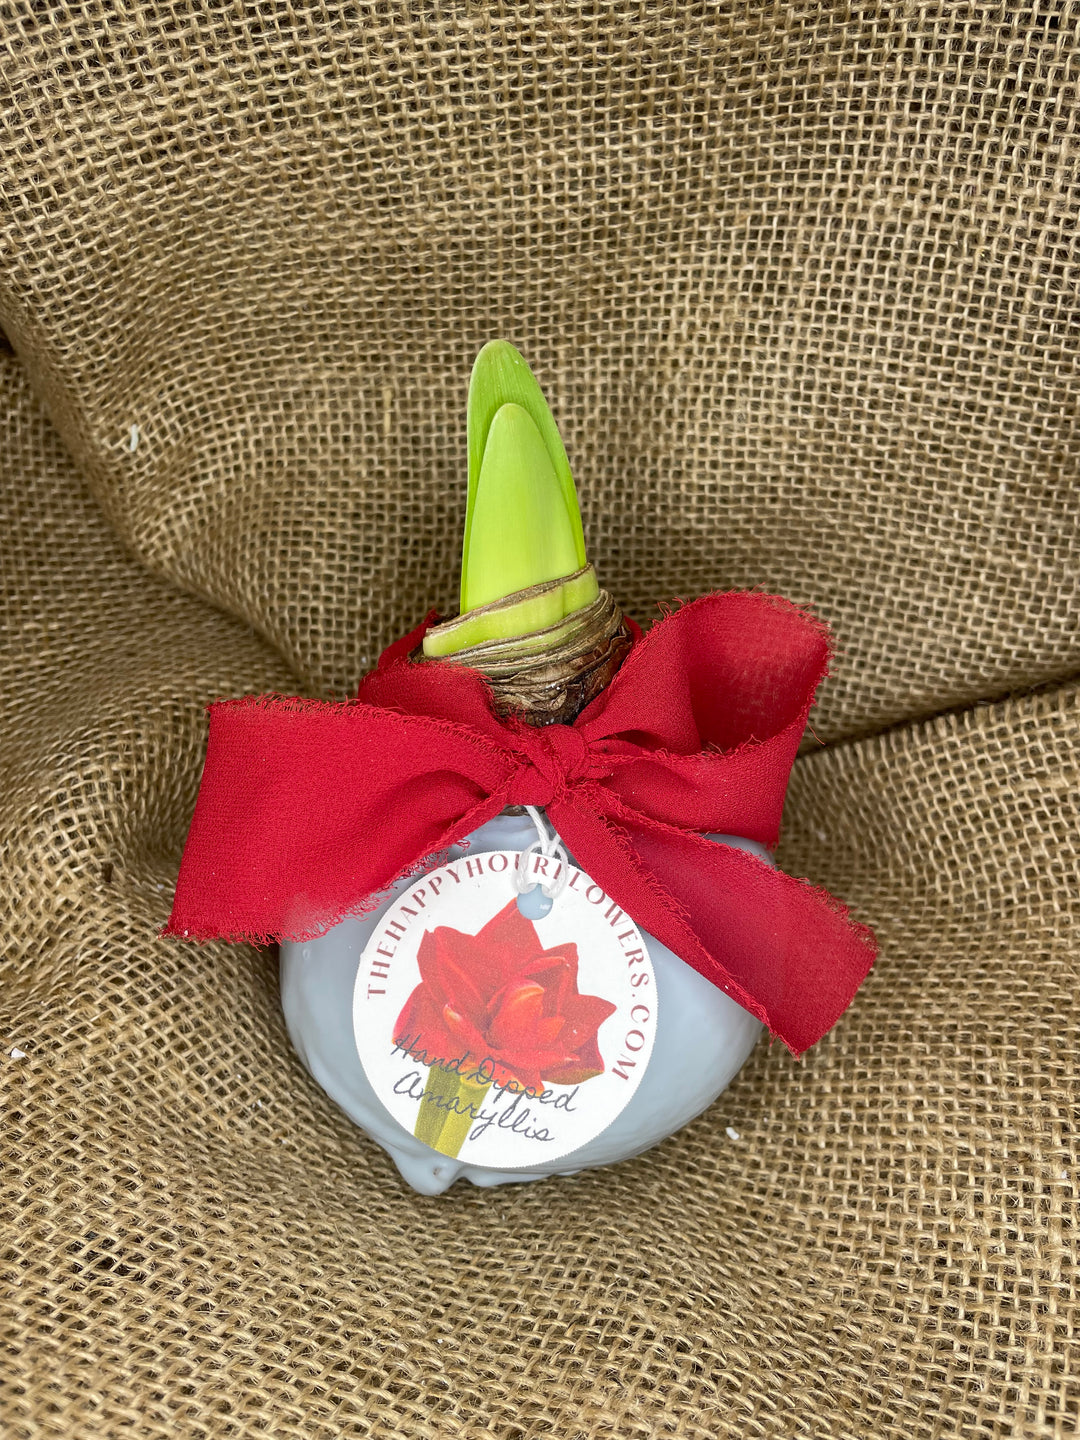 Cherry Nymph Amaryllis gift waxed bulb hand dipped